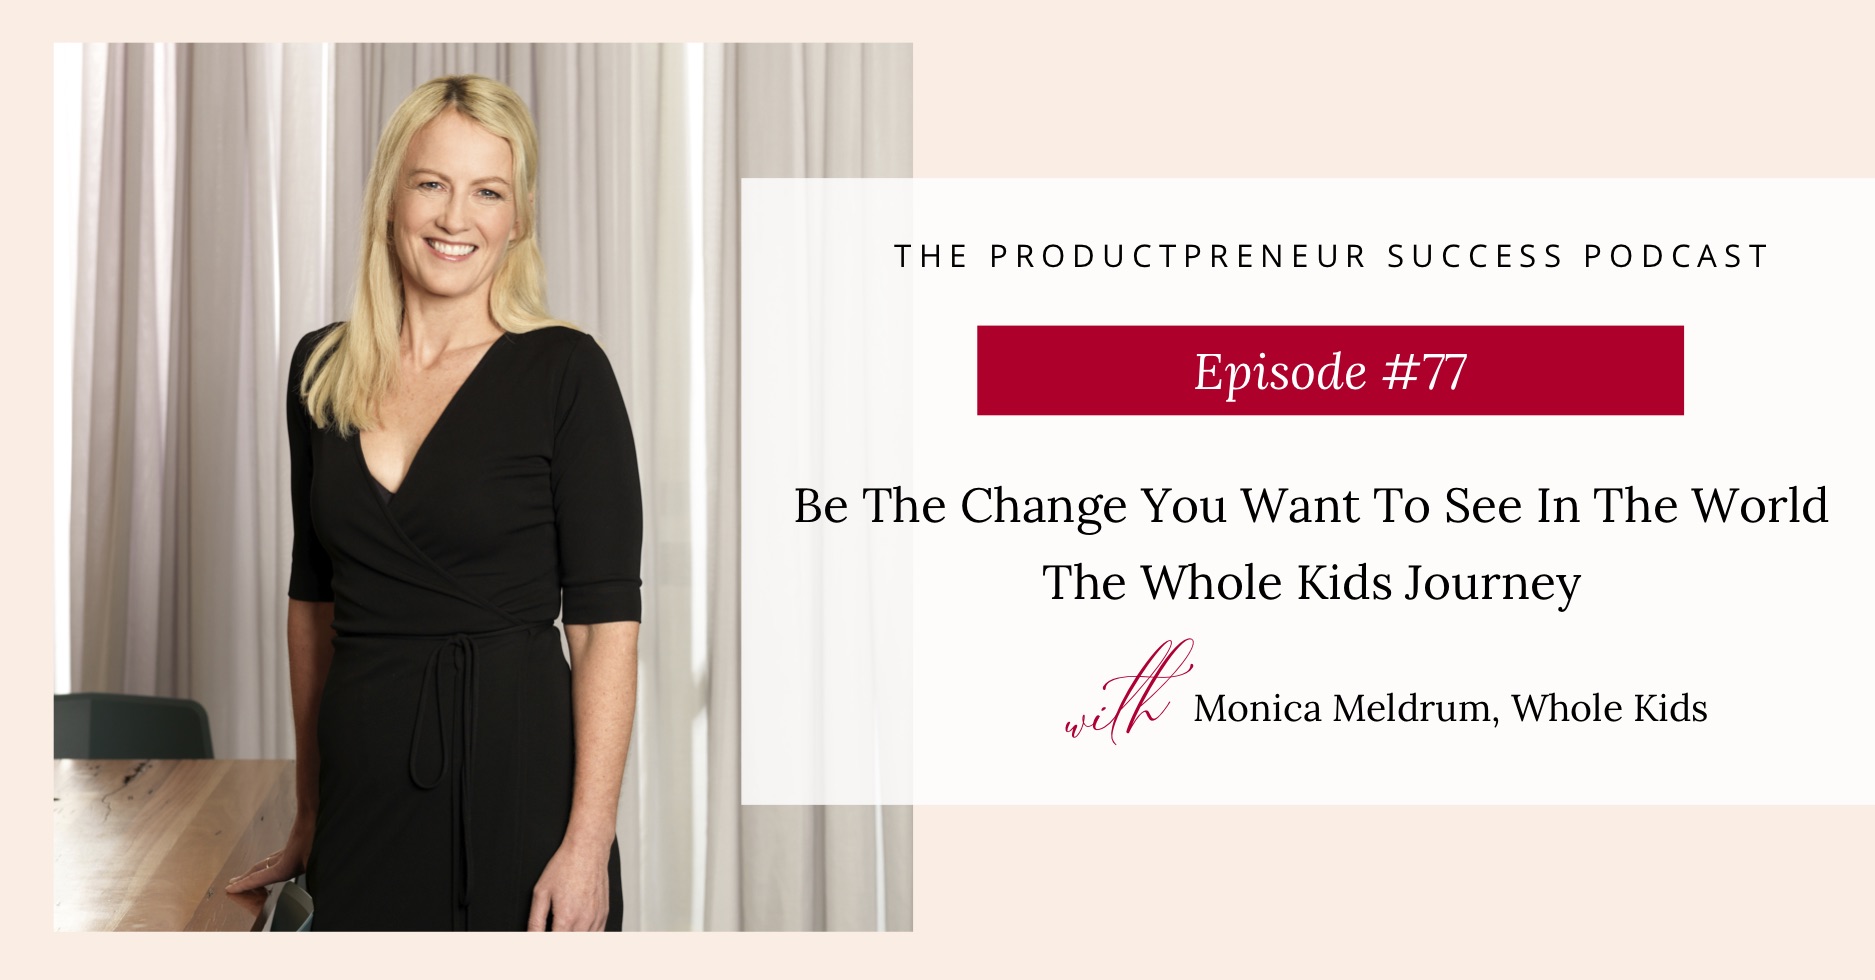 Podcast interview with Monica Meldrum from Whole Kids